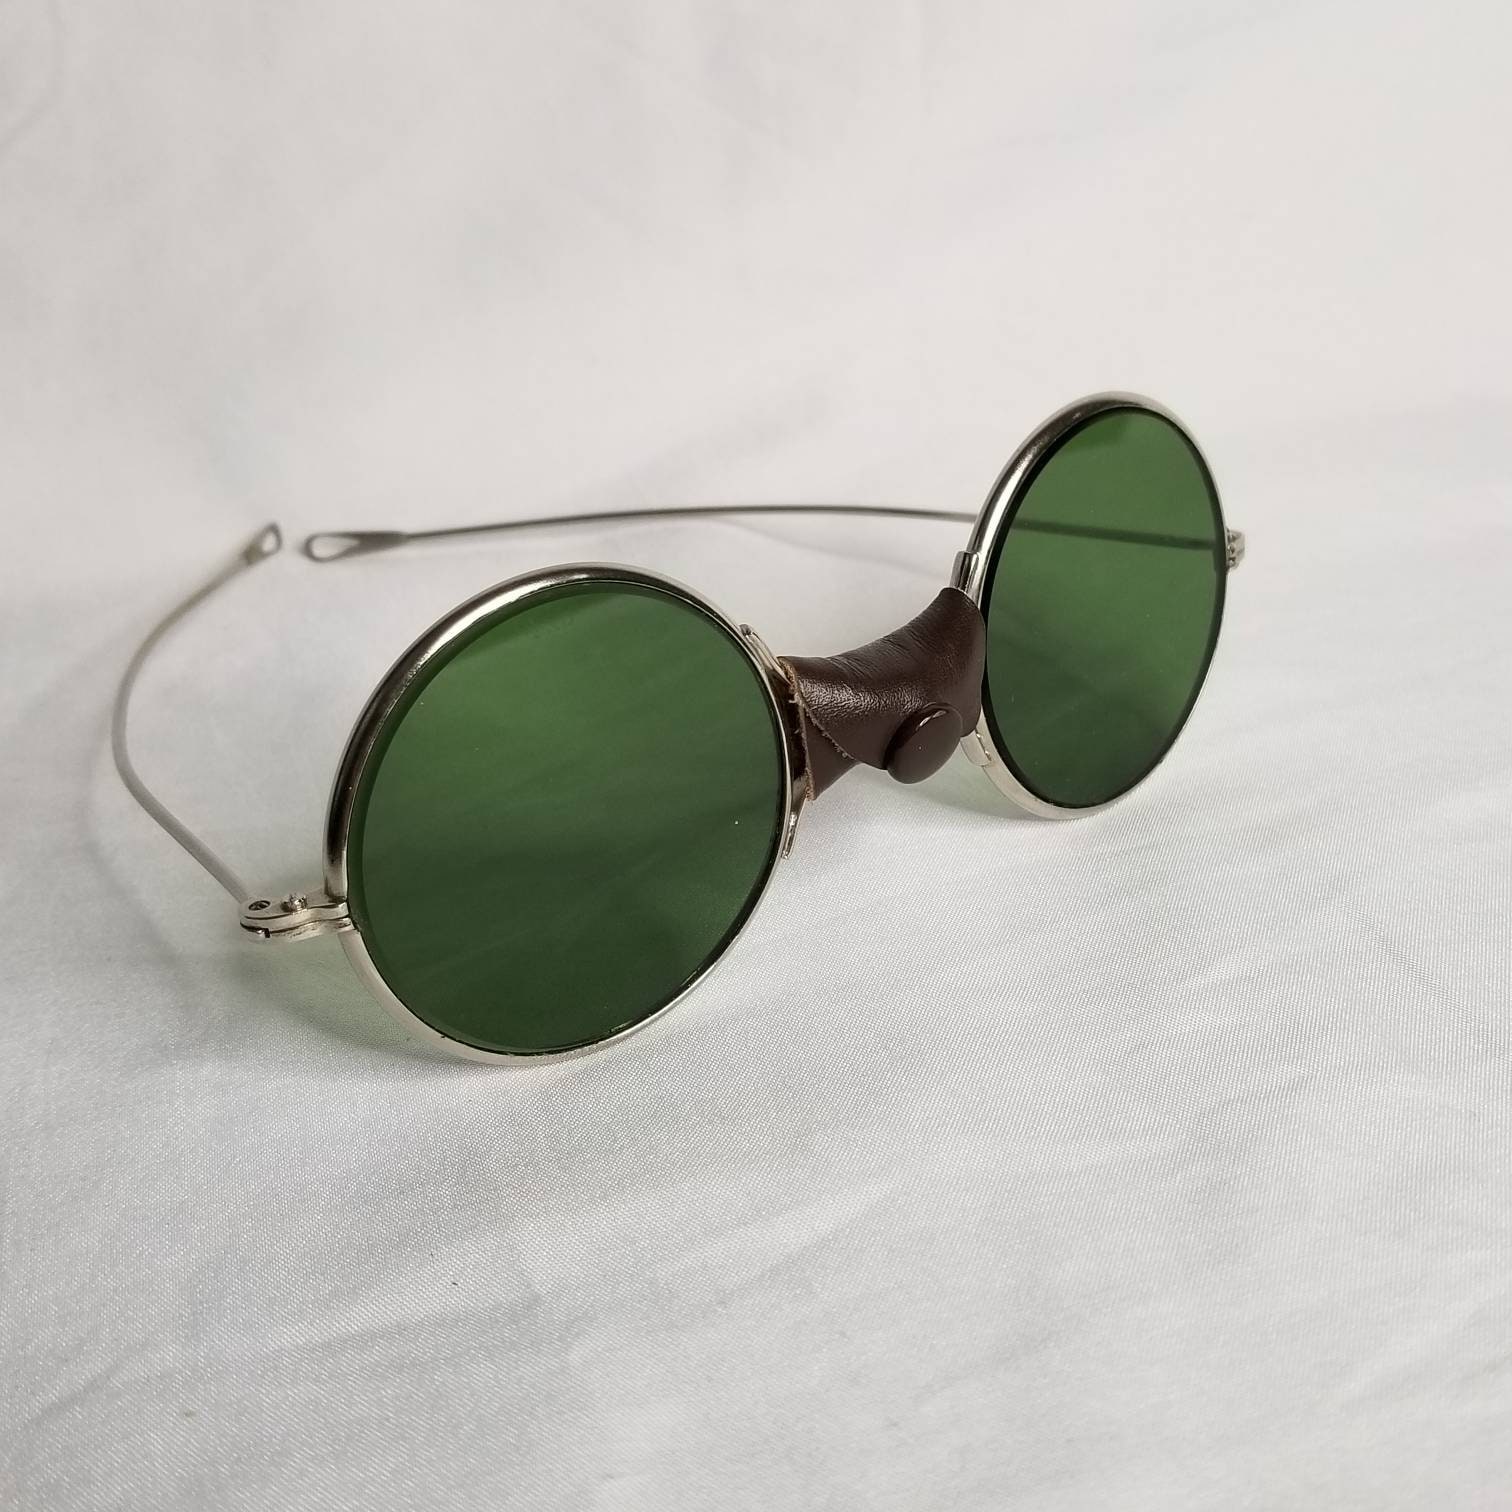 Buy OLIVE GREEN RETRO SUNGLASSES for Women Online in India